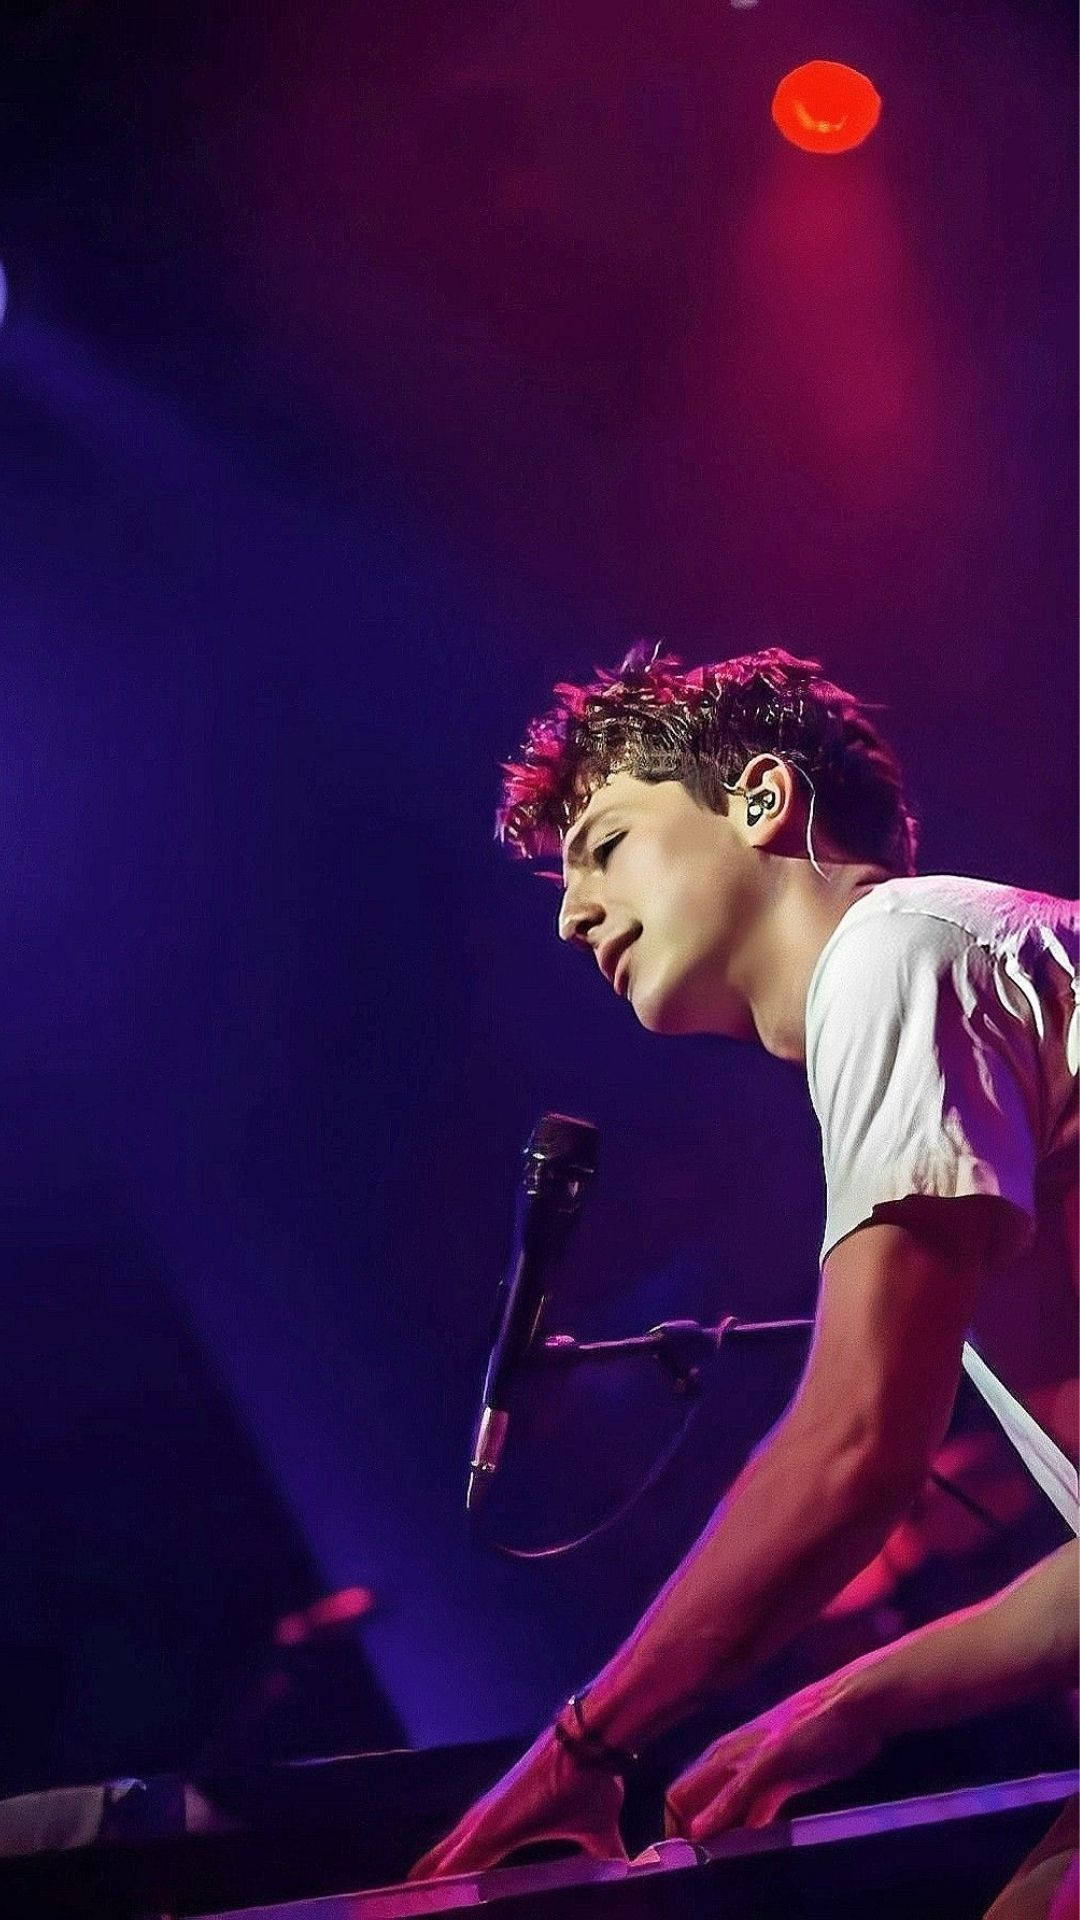 Charlie Puth Playing Aesthetically Background